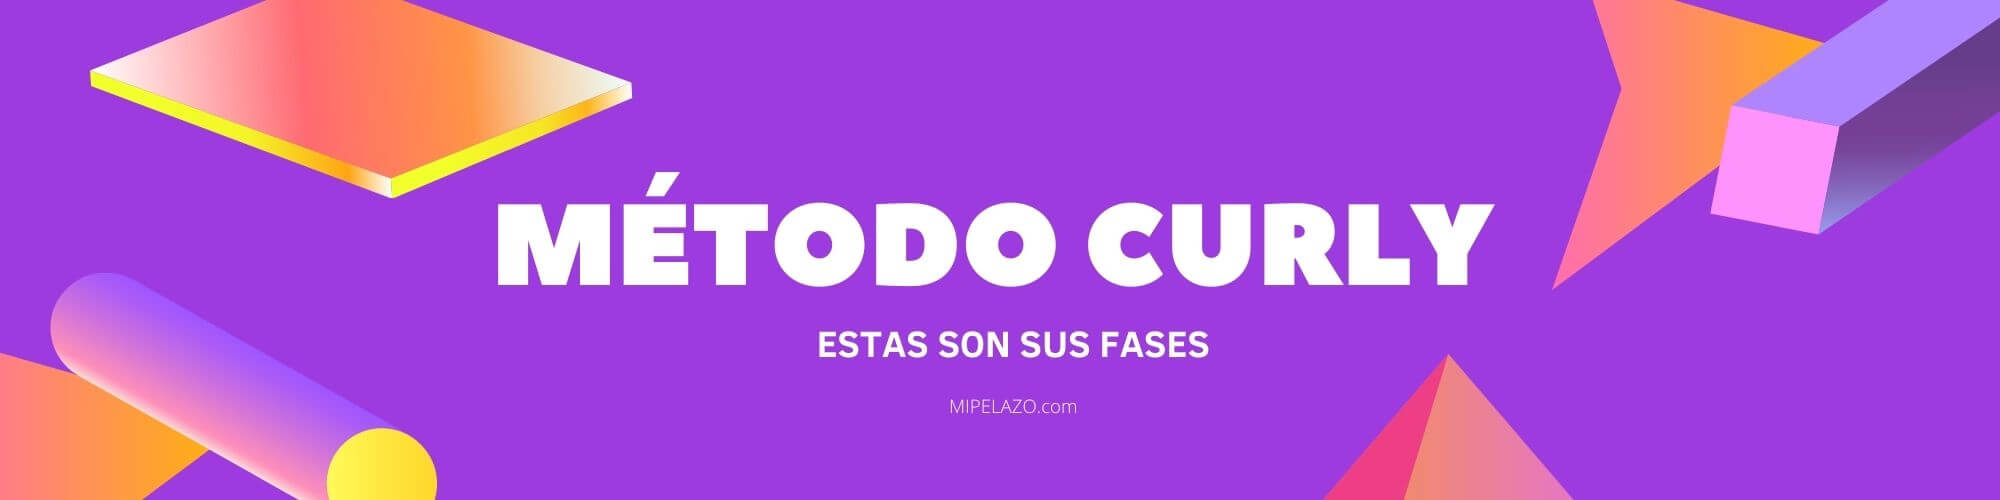 FASES METODO CURLY ICON